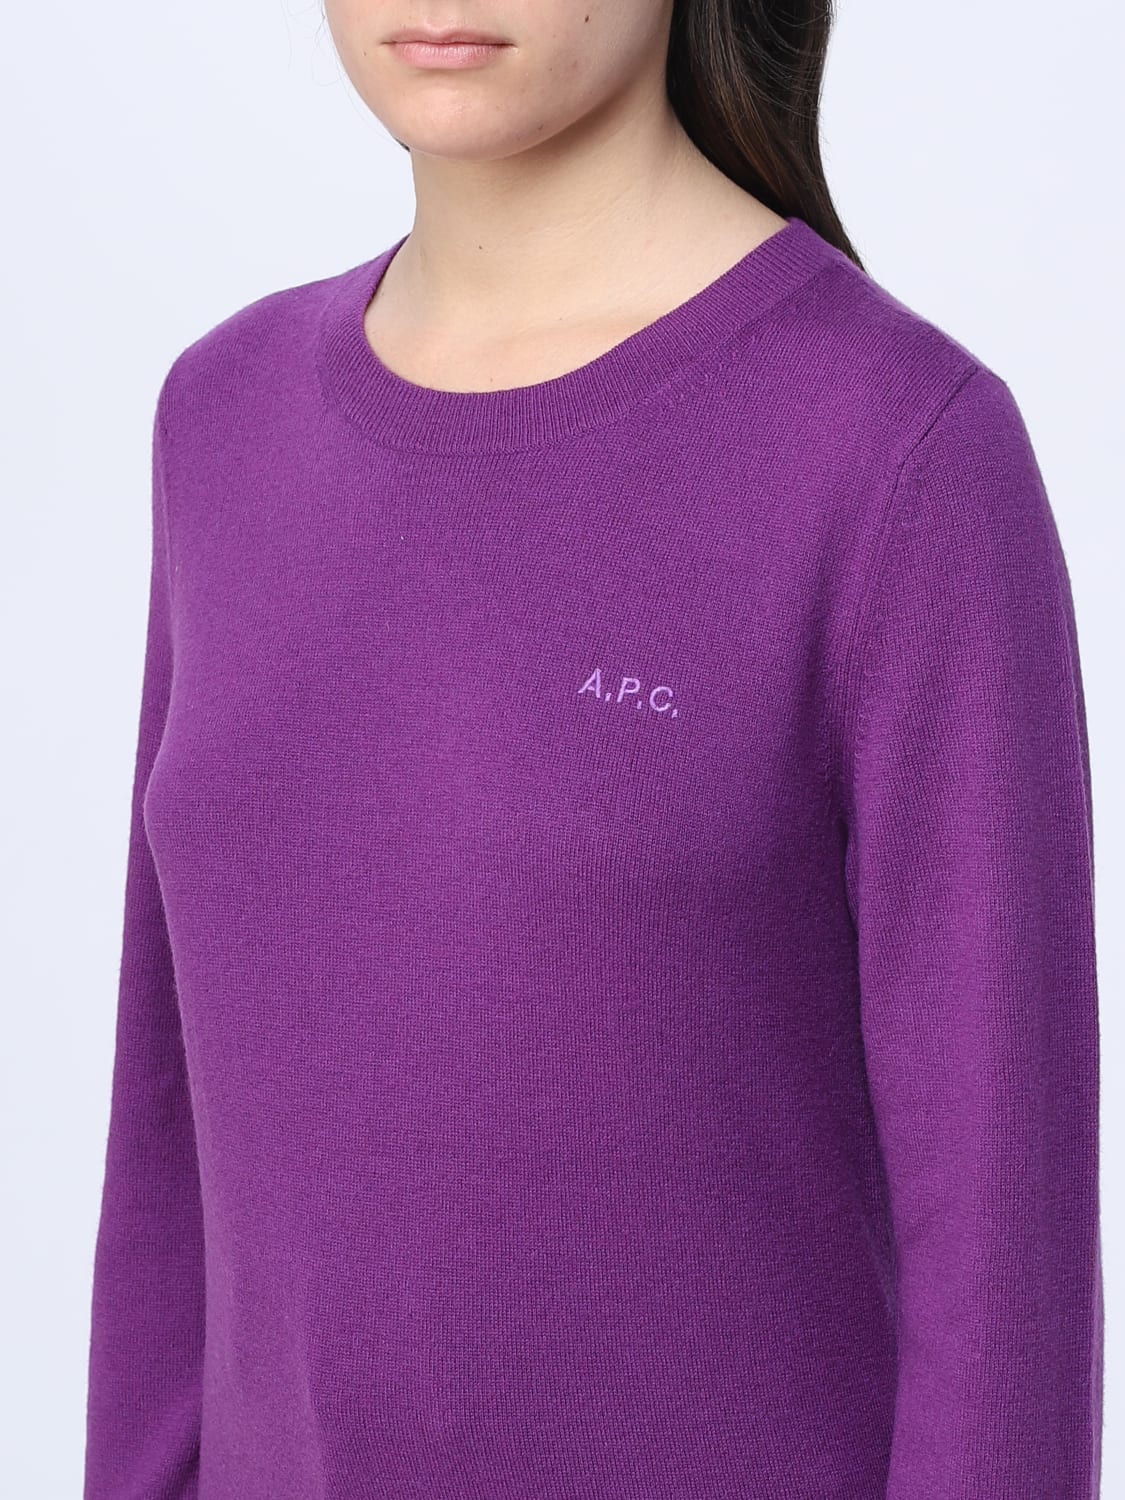 A.P.C.: sweater for woman - Violet | A.p.c. sweater WVBCGF23228 online ...